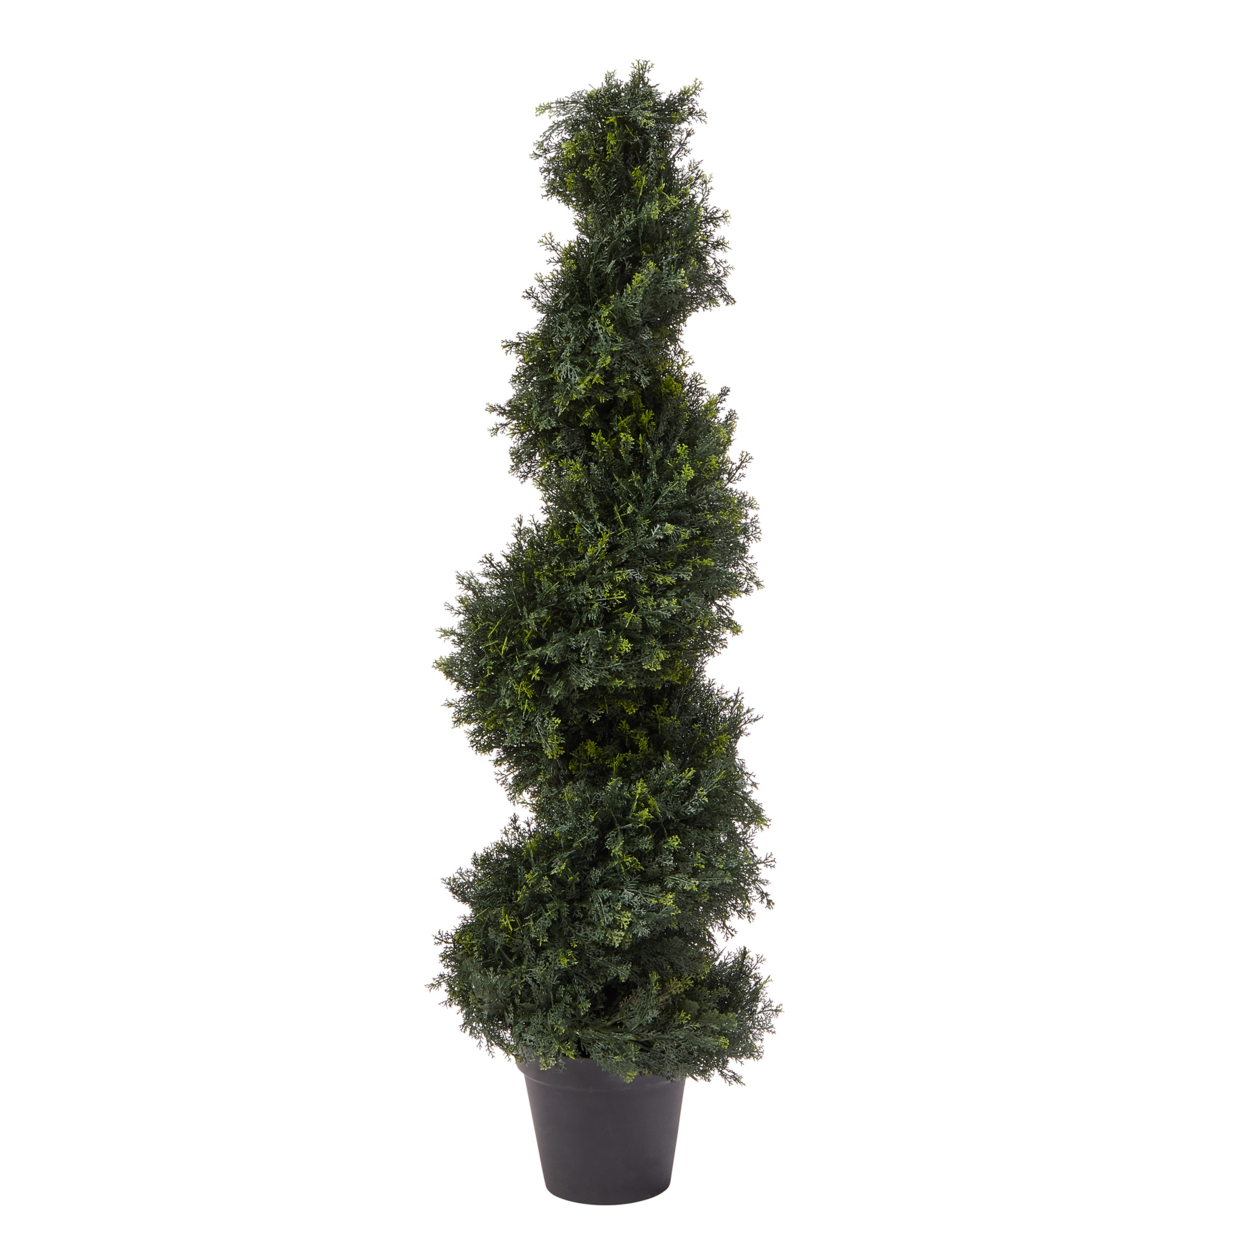 4-Foot-Tall Artificial Cypress Spiral Topiary Tree- Potted Indoor Or Outdoor UV Protection Trees In Pot